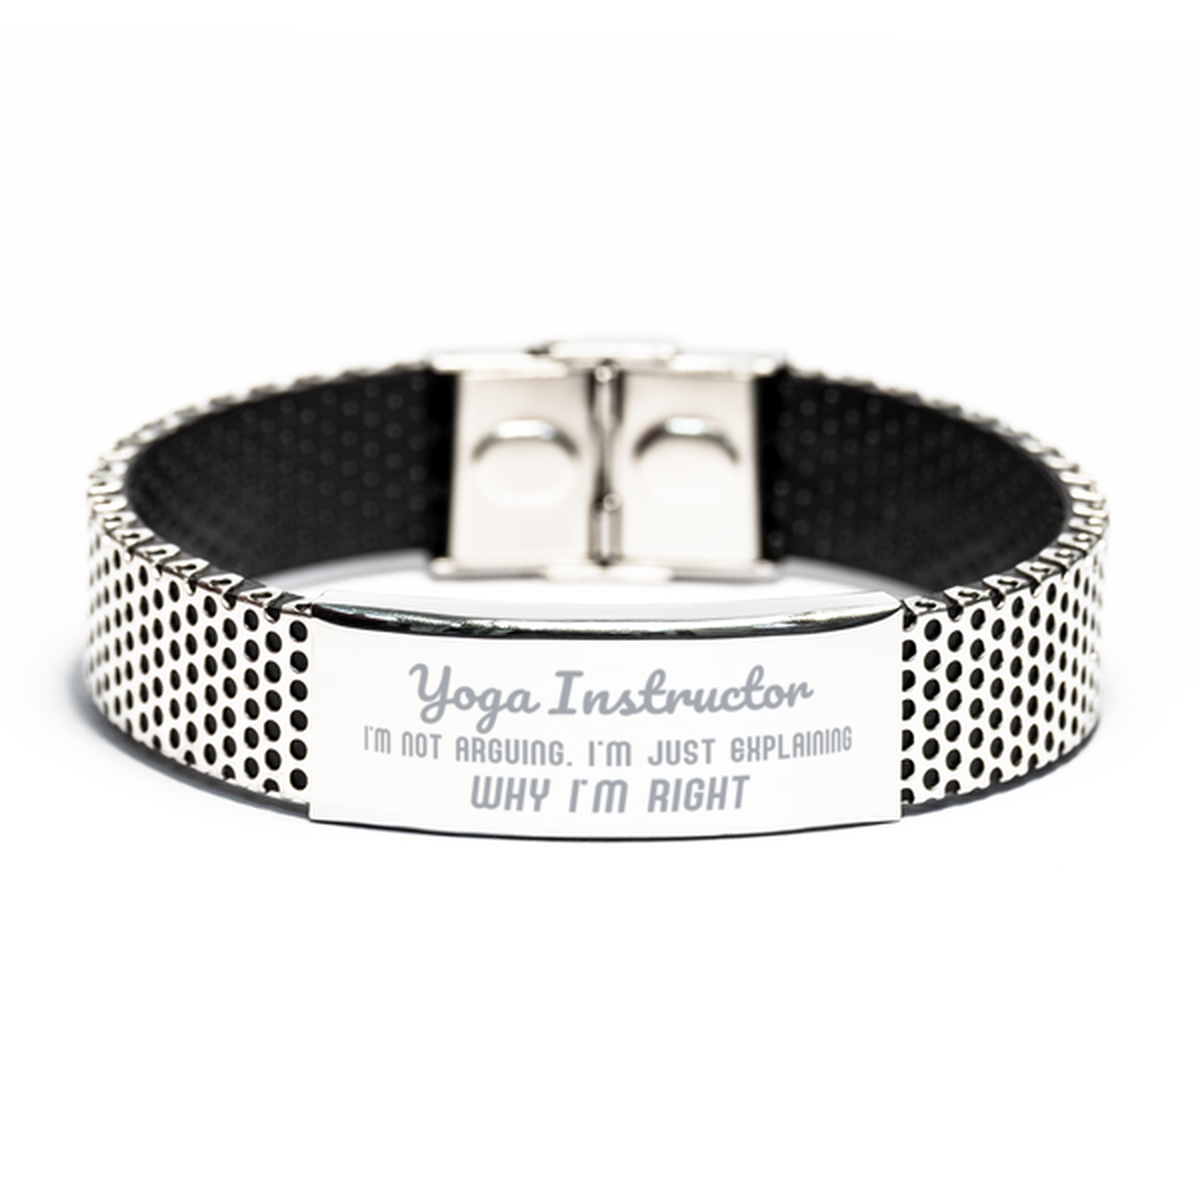 Yoga Instructor I'm not Arguing. I'm Just Explaining Why I'm RIGHT Stainless Steel Bracelet, Funny Saying Quote Yoga Instructor Gifts For Yoga Instructor Graduation Birthday Christmas Gifts for Men Women Coworker